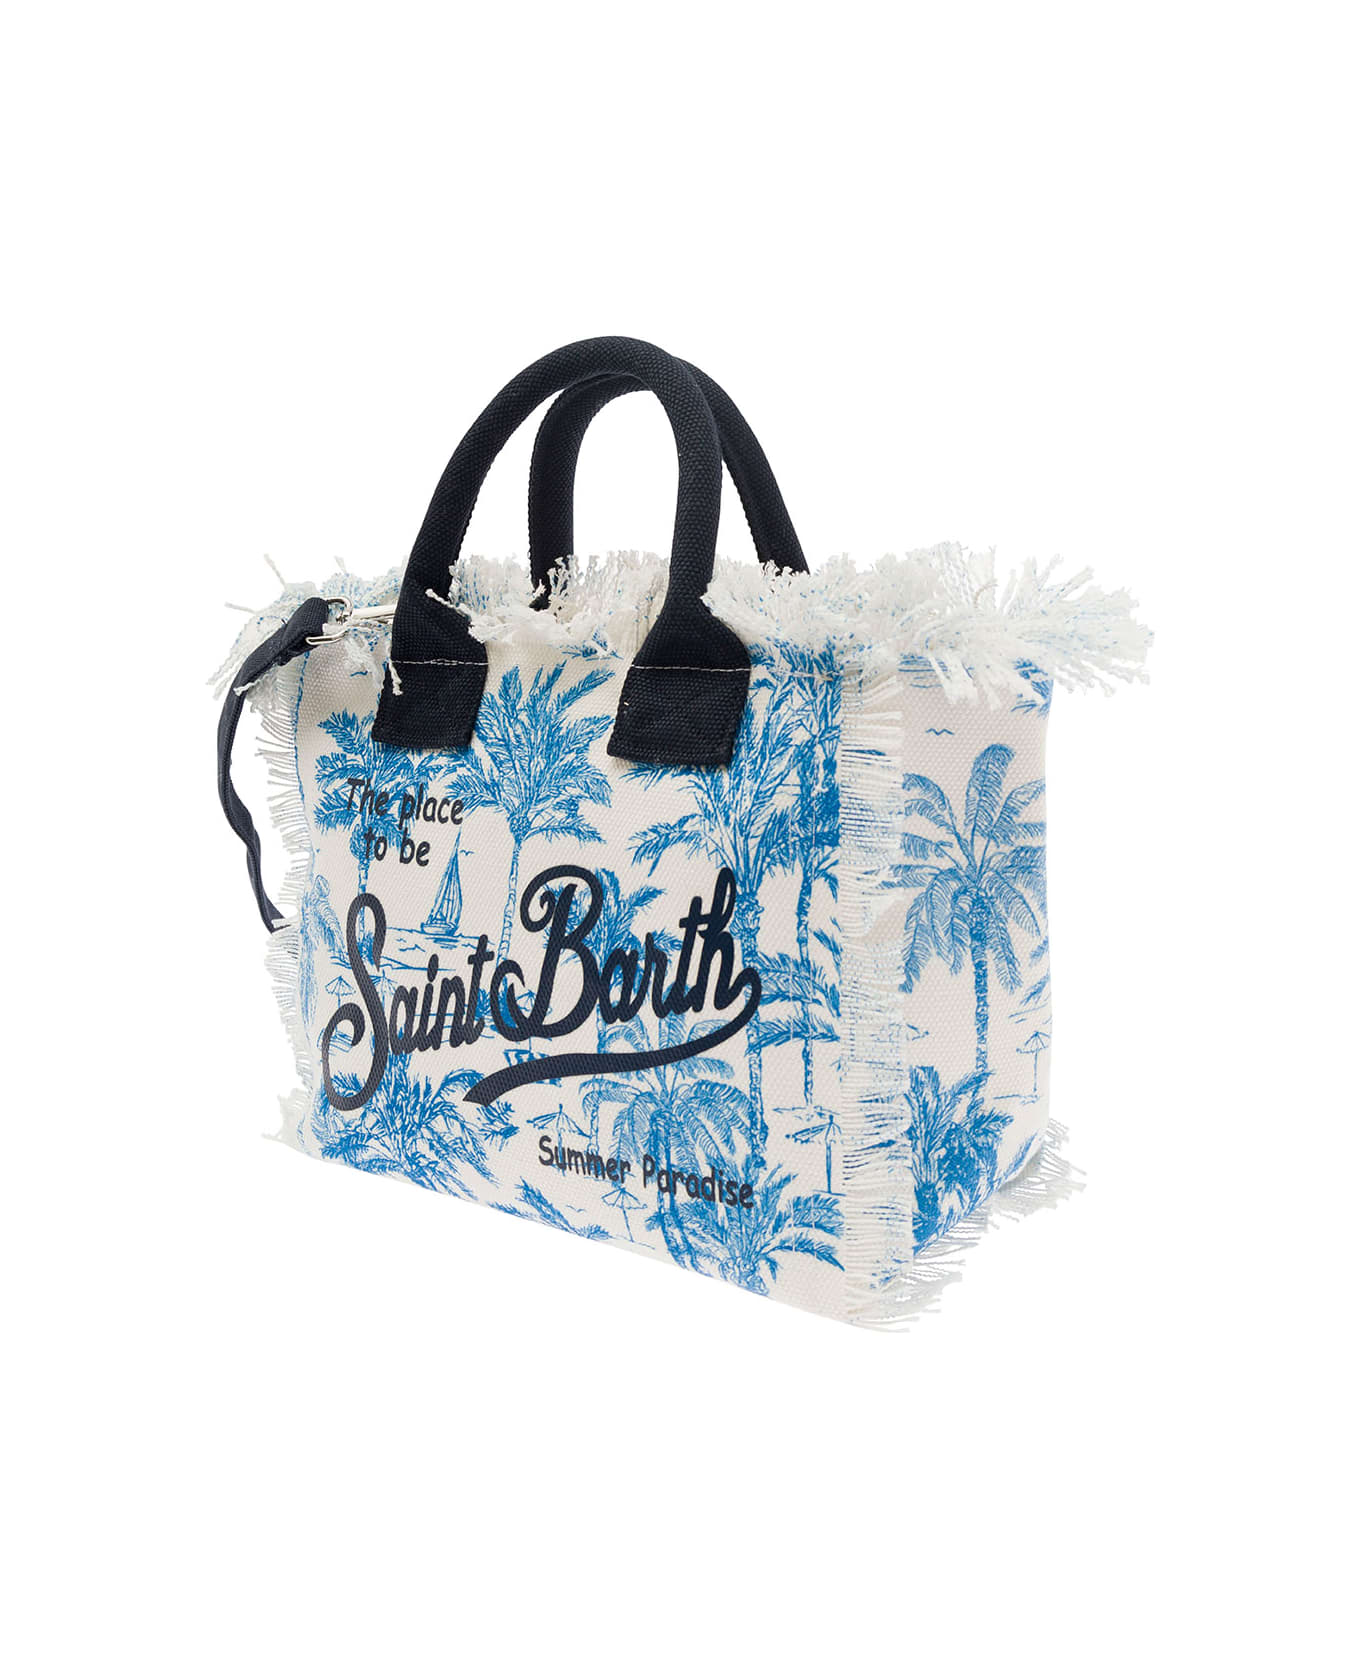 MC2 Saint Barth Light Blue And White Handbag With Logo And Palm Print In Cotton Canvas Girl - Light blue